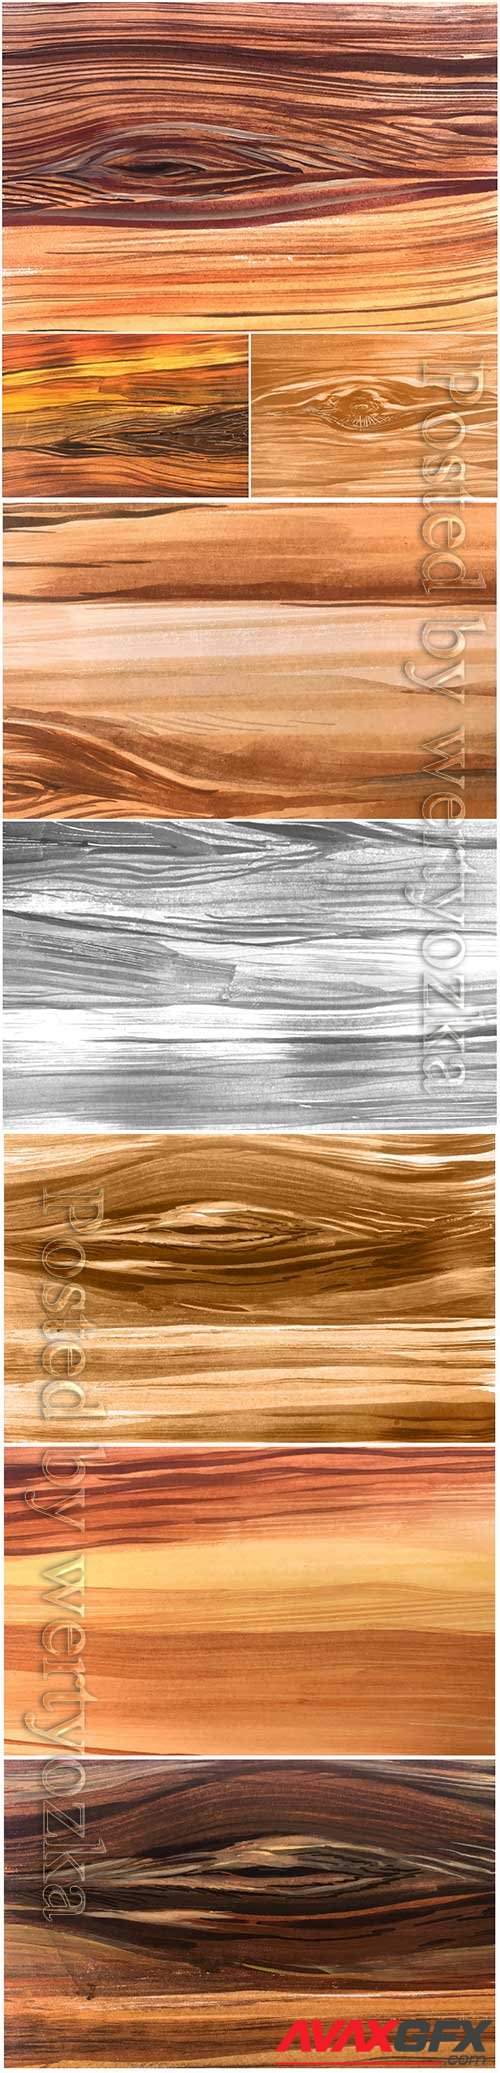 Natural wooden texture vector background